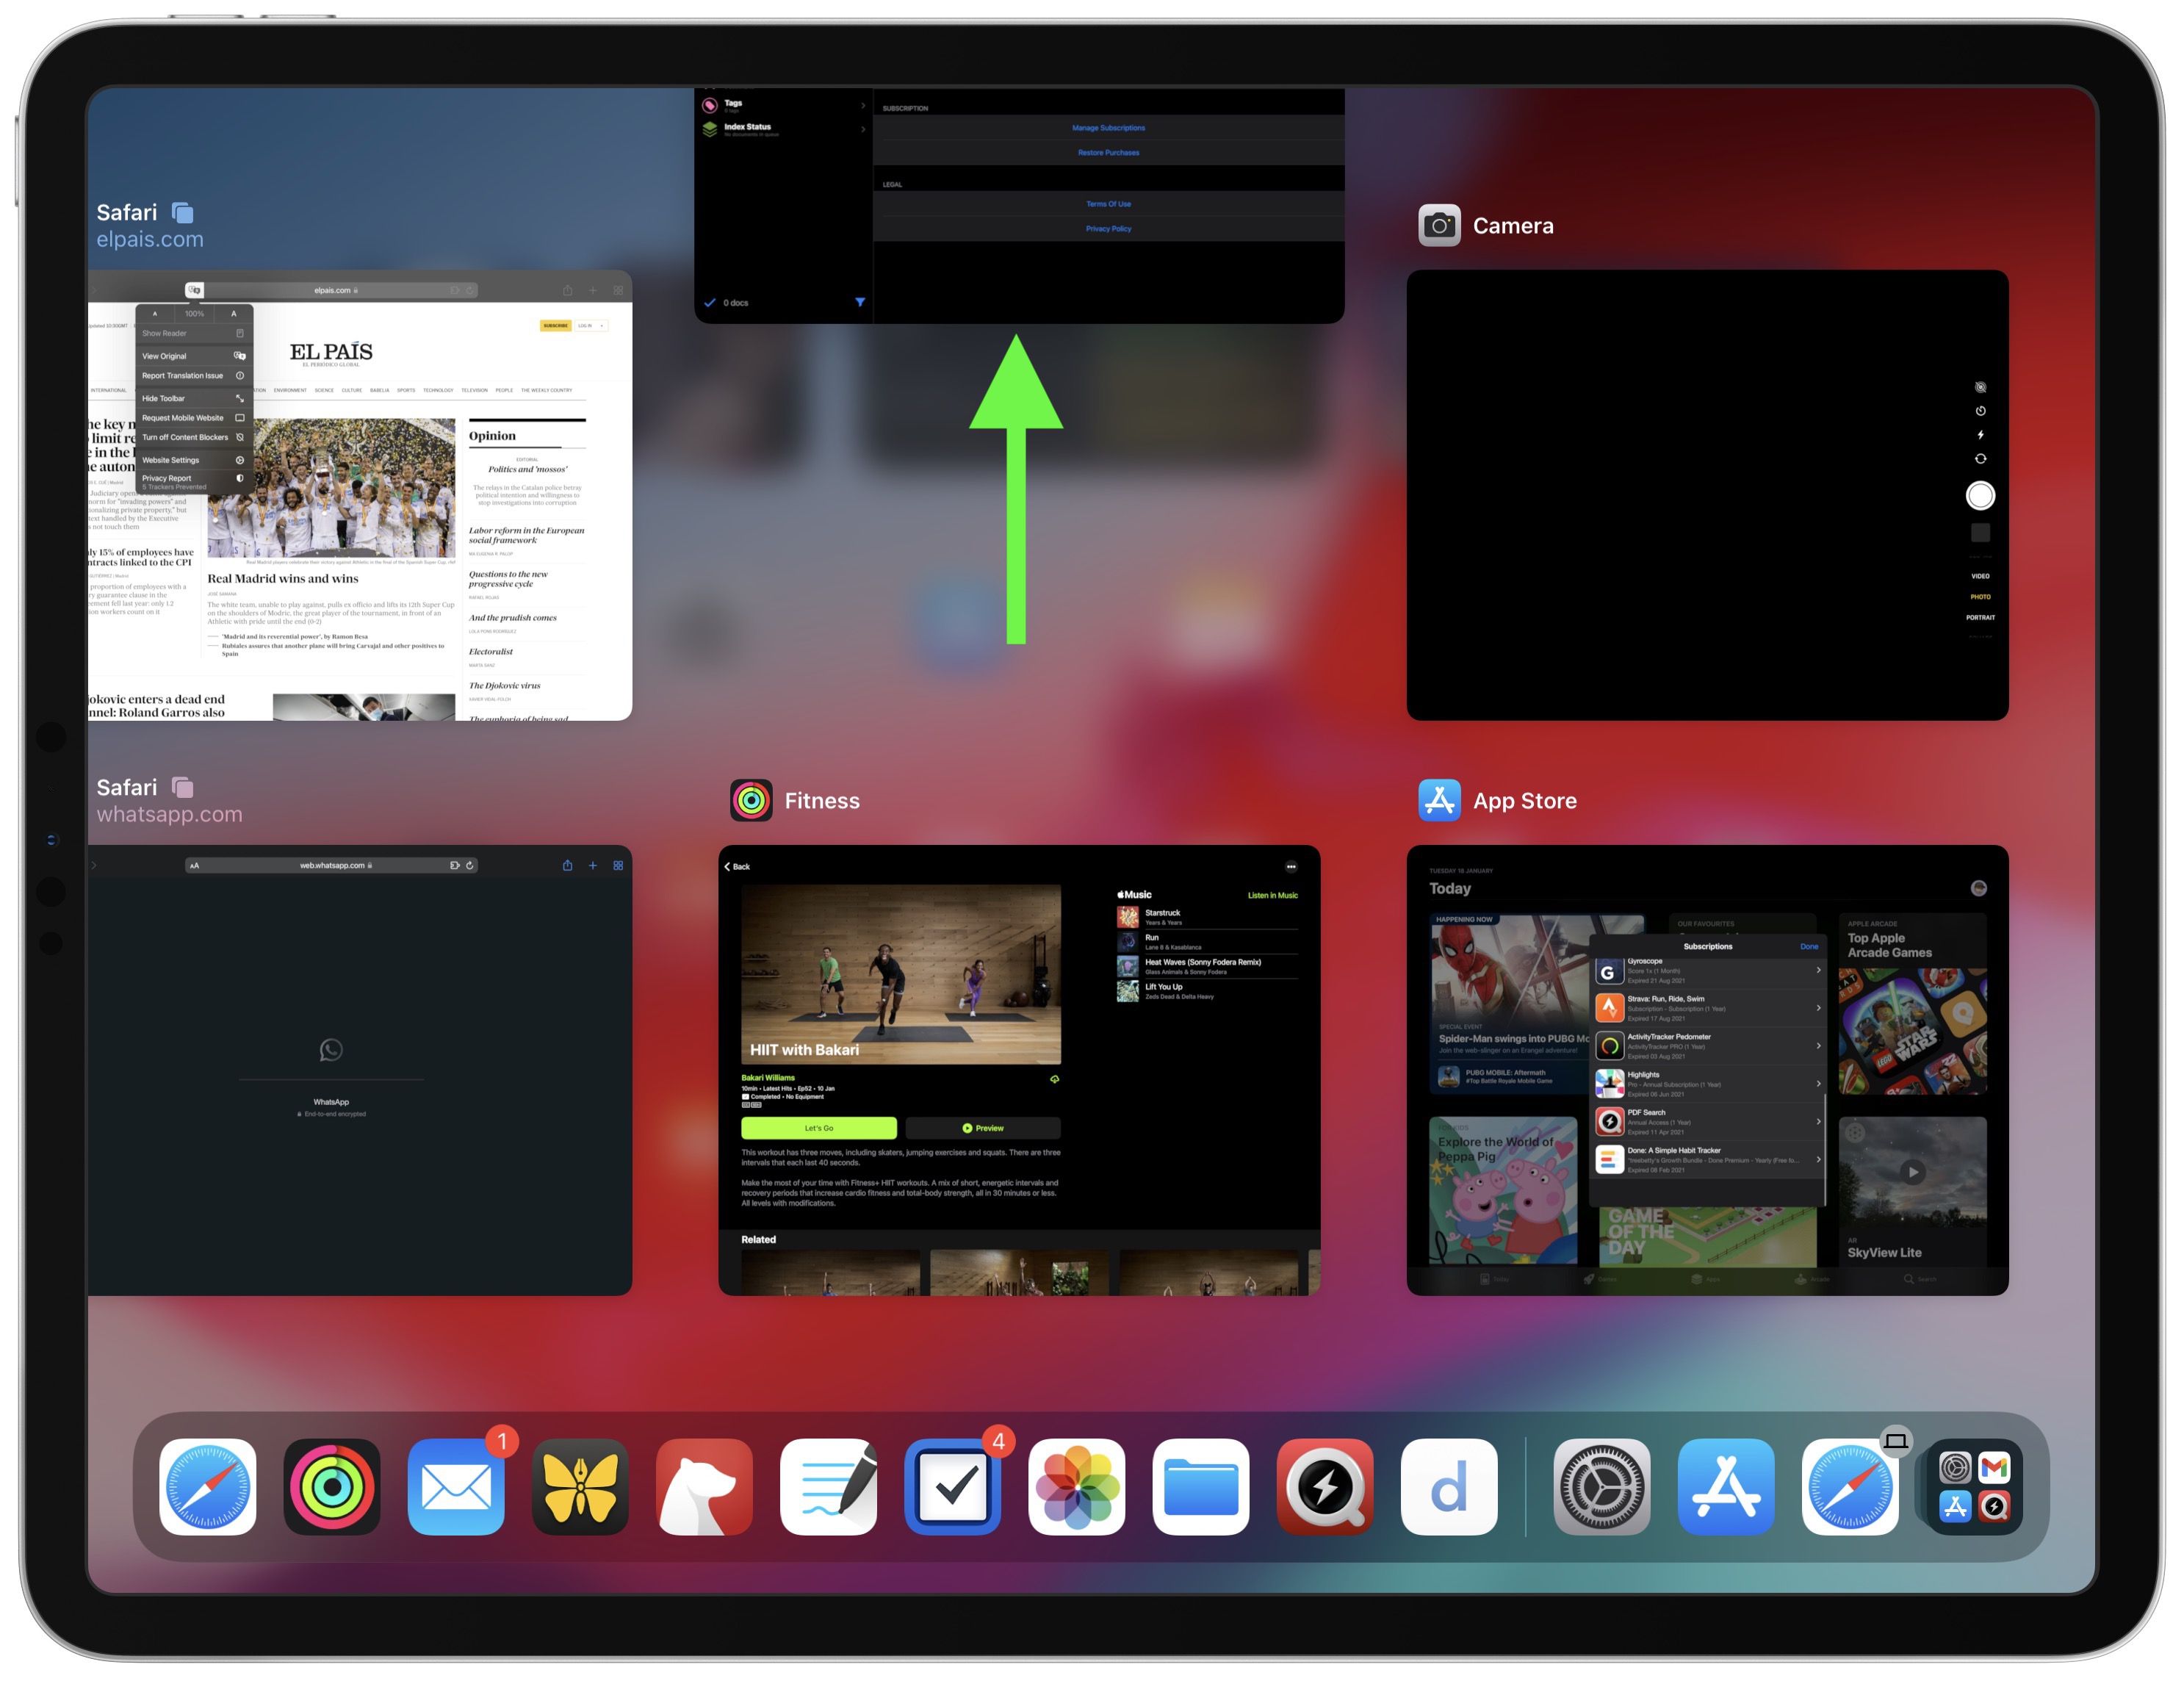 How to Close or Force Quit iPad Apps - MacRumors